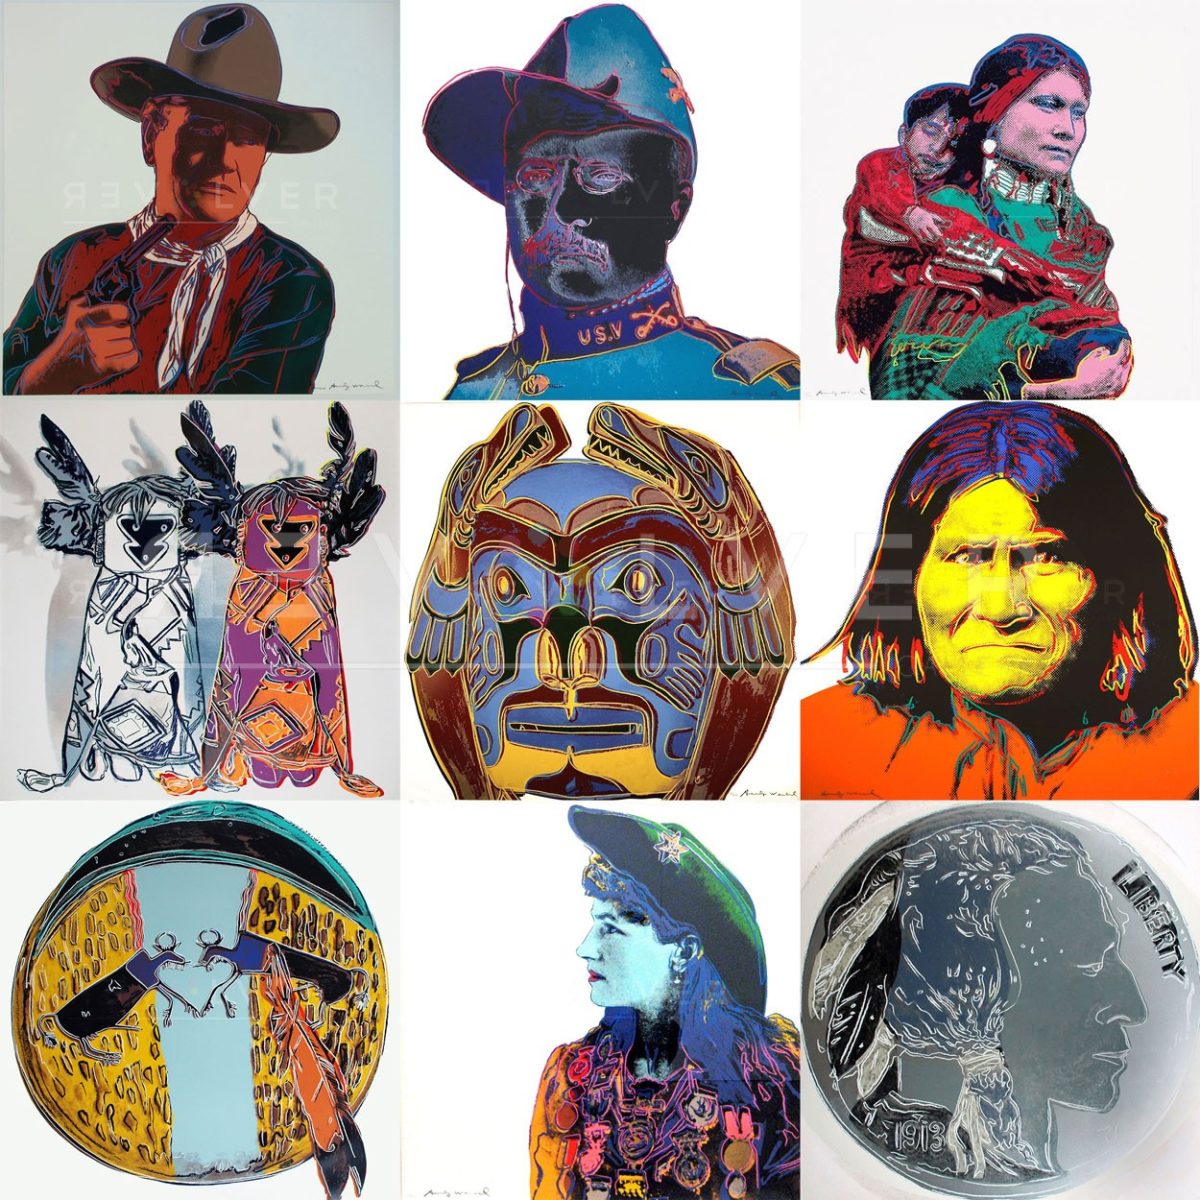 Nine prints from Andy Warhol Cowboys and Indians complete portfolio. The featured image for the portfolio on the website.